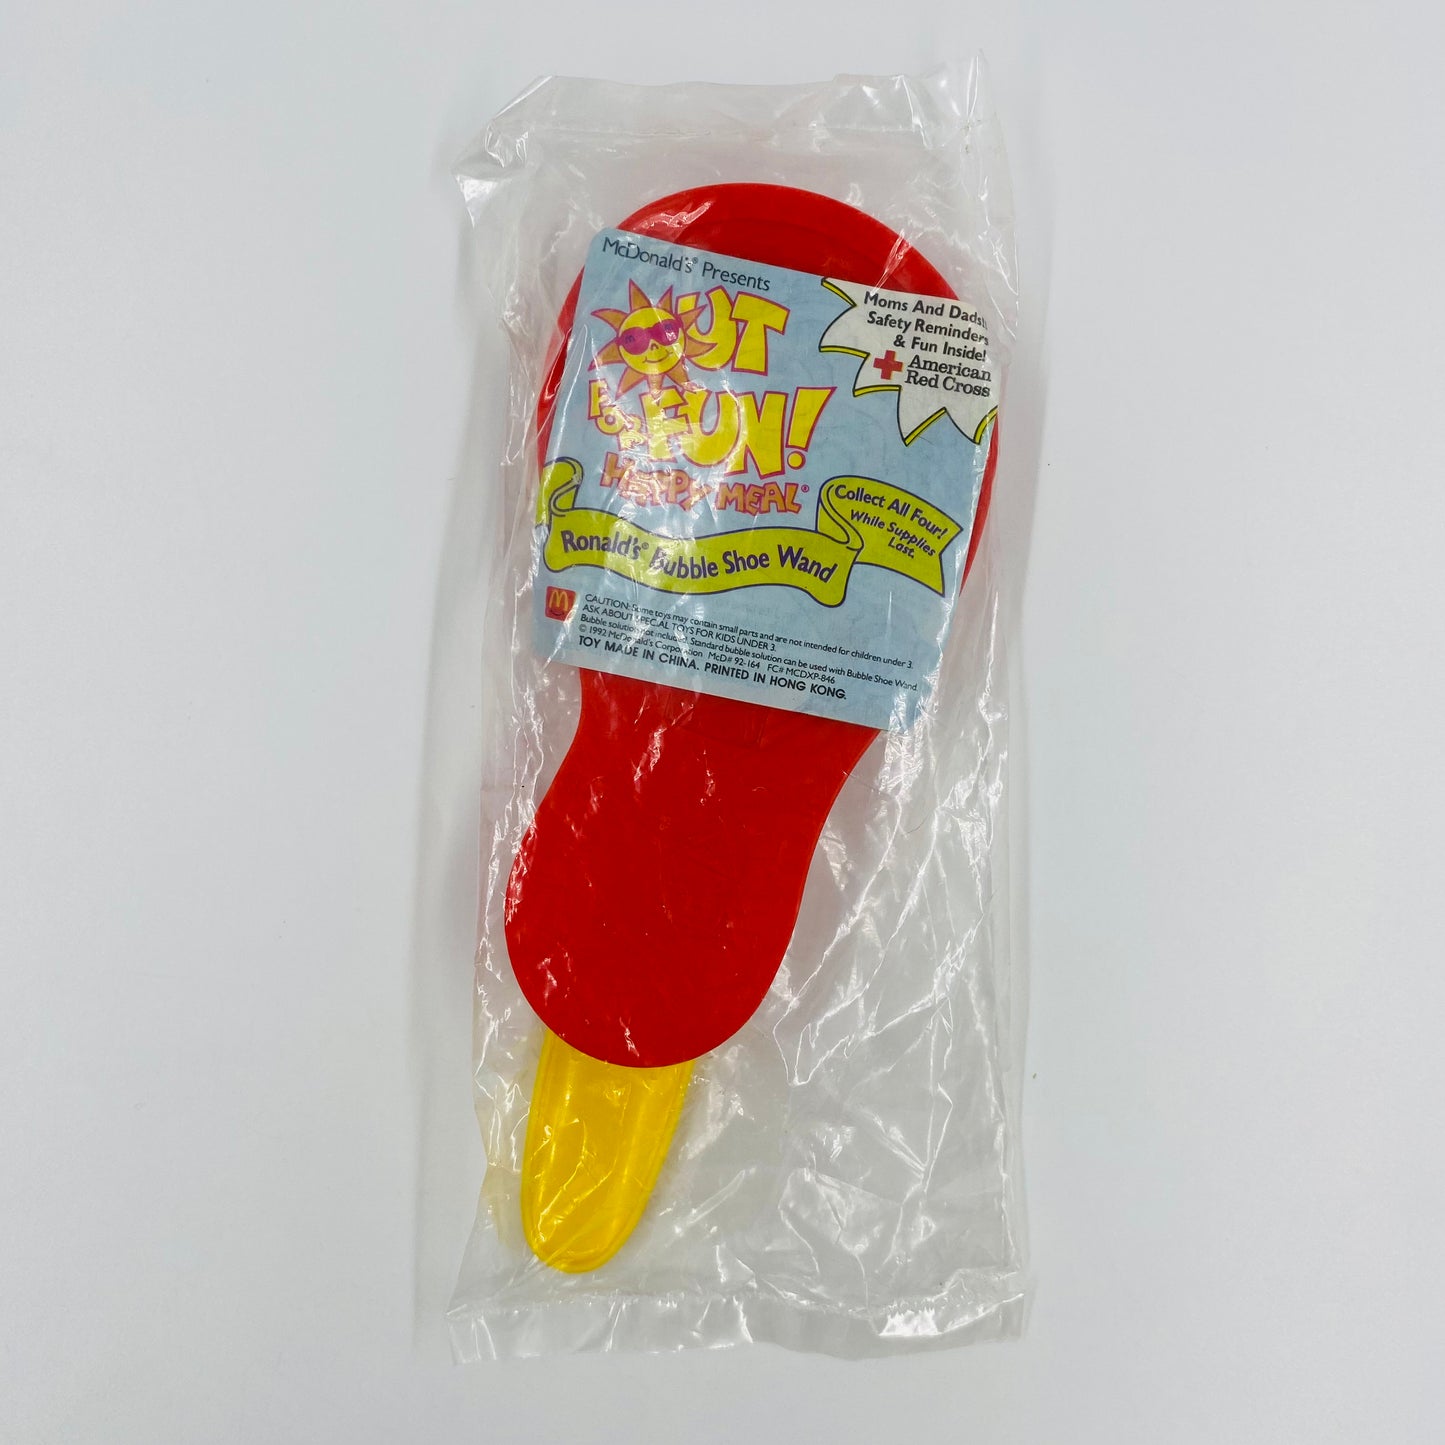 McDonald's Presents Out For Fun! Ronald's Bubble Shoe Wand McDonald's Happy Meal toy (1992) bagged